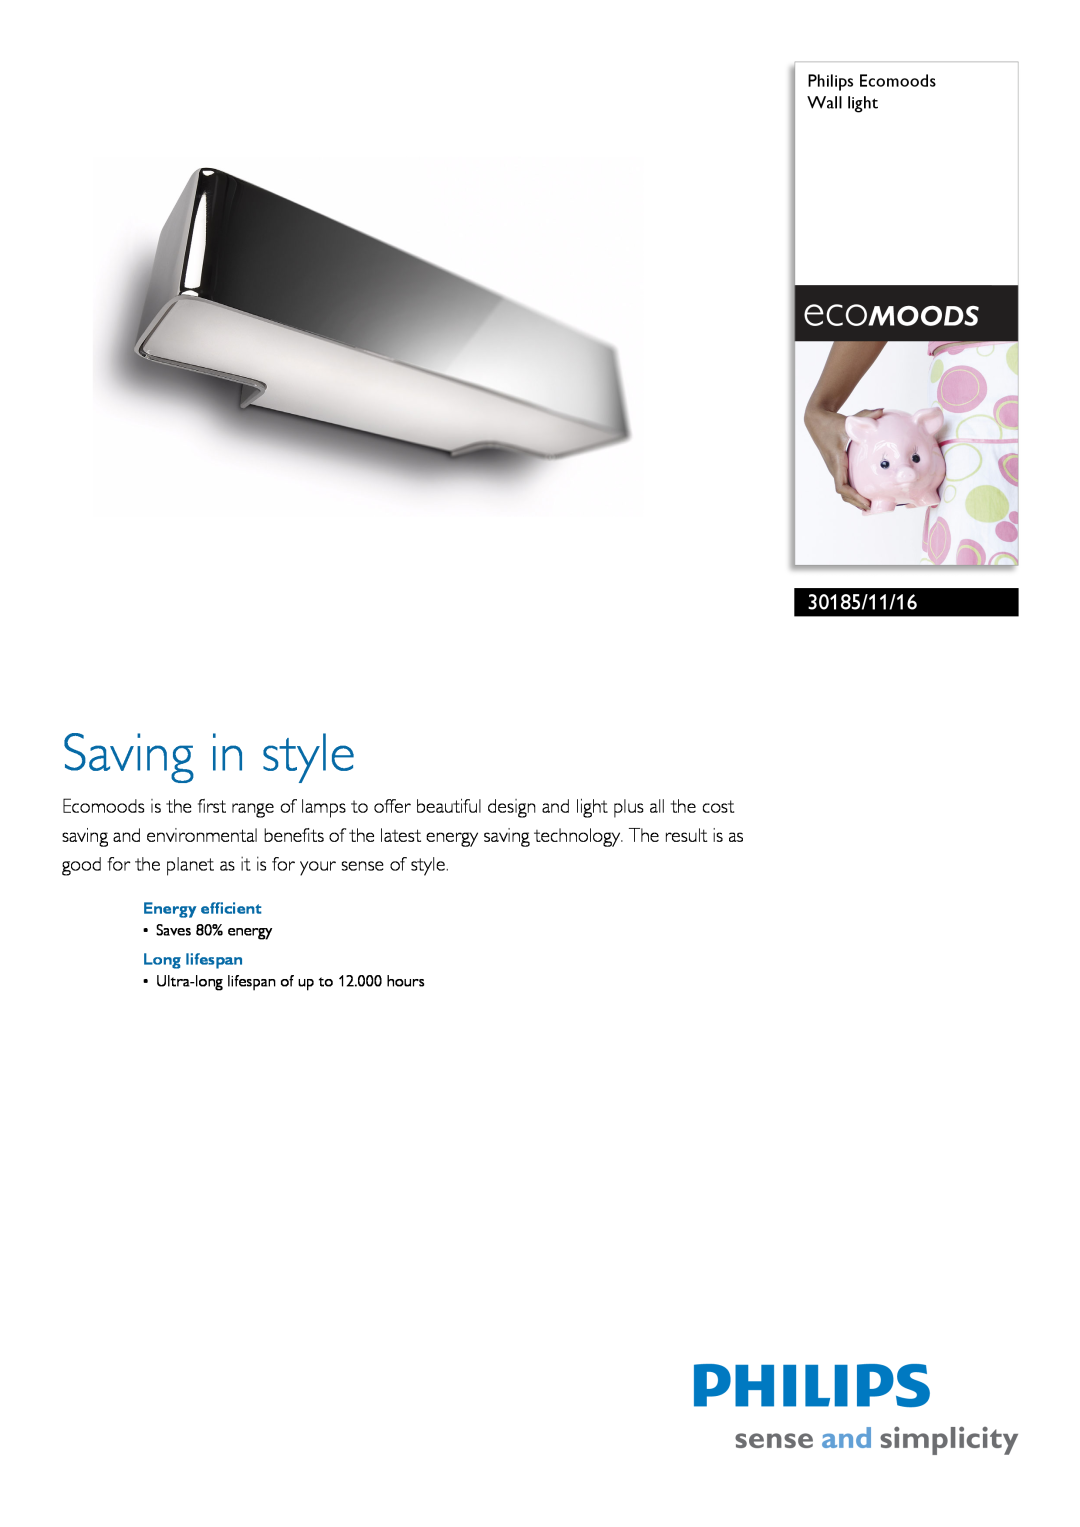 Philips 30185/11/16 manual Philips Ecomoods Wall light, Energy efficient, Long lifespan, Saving in style, Saves 80% energy 